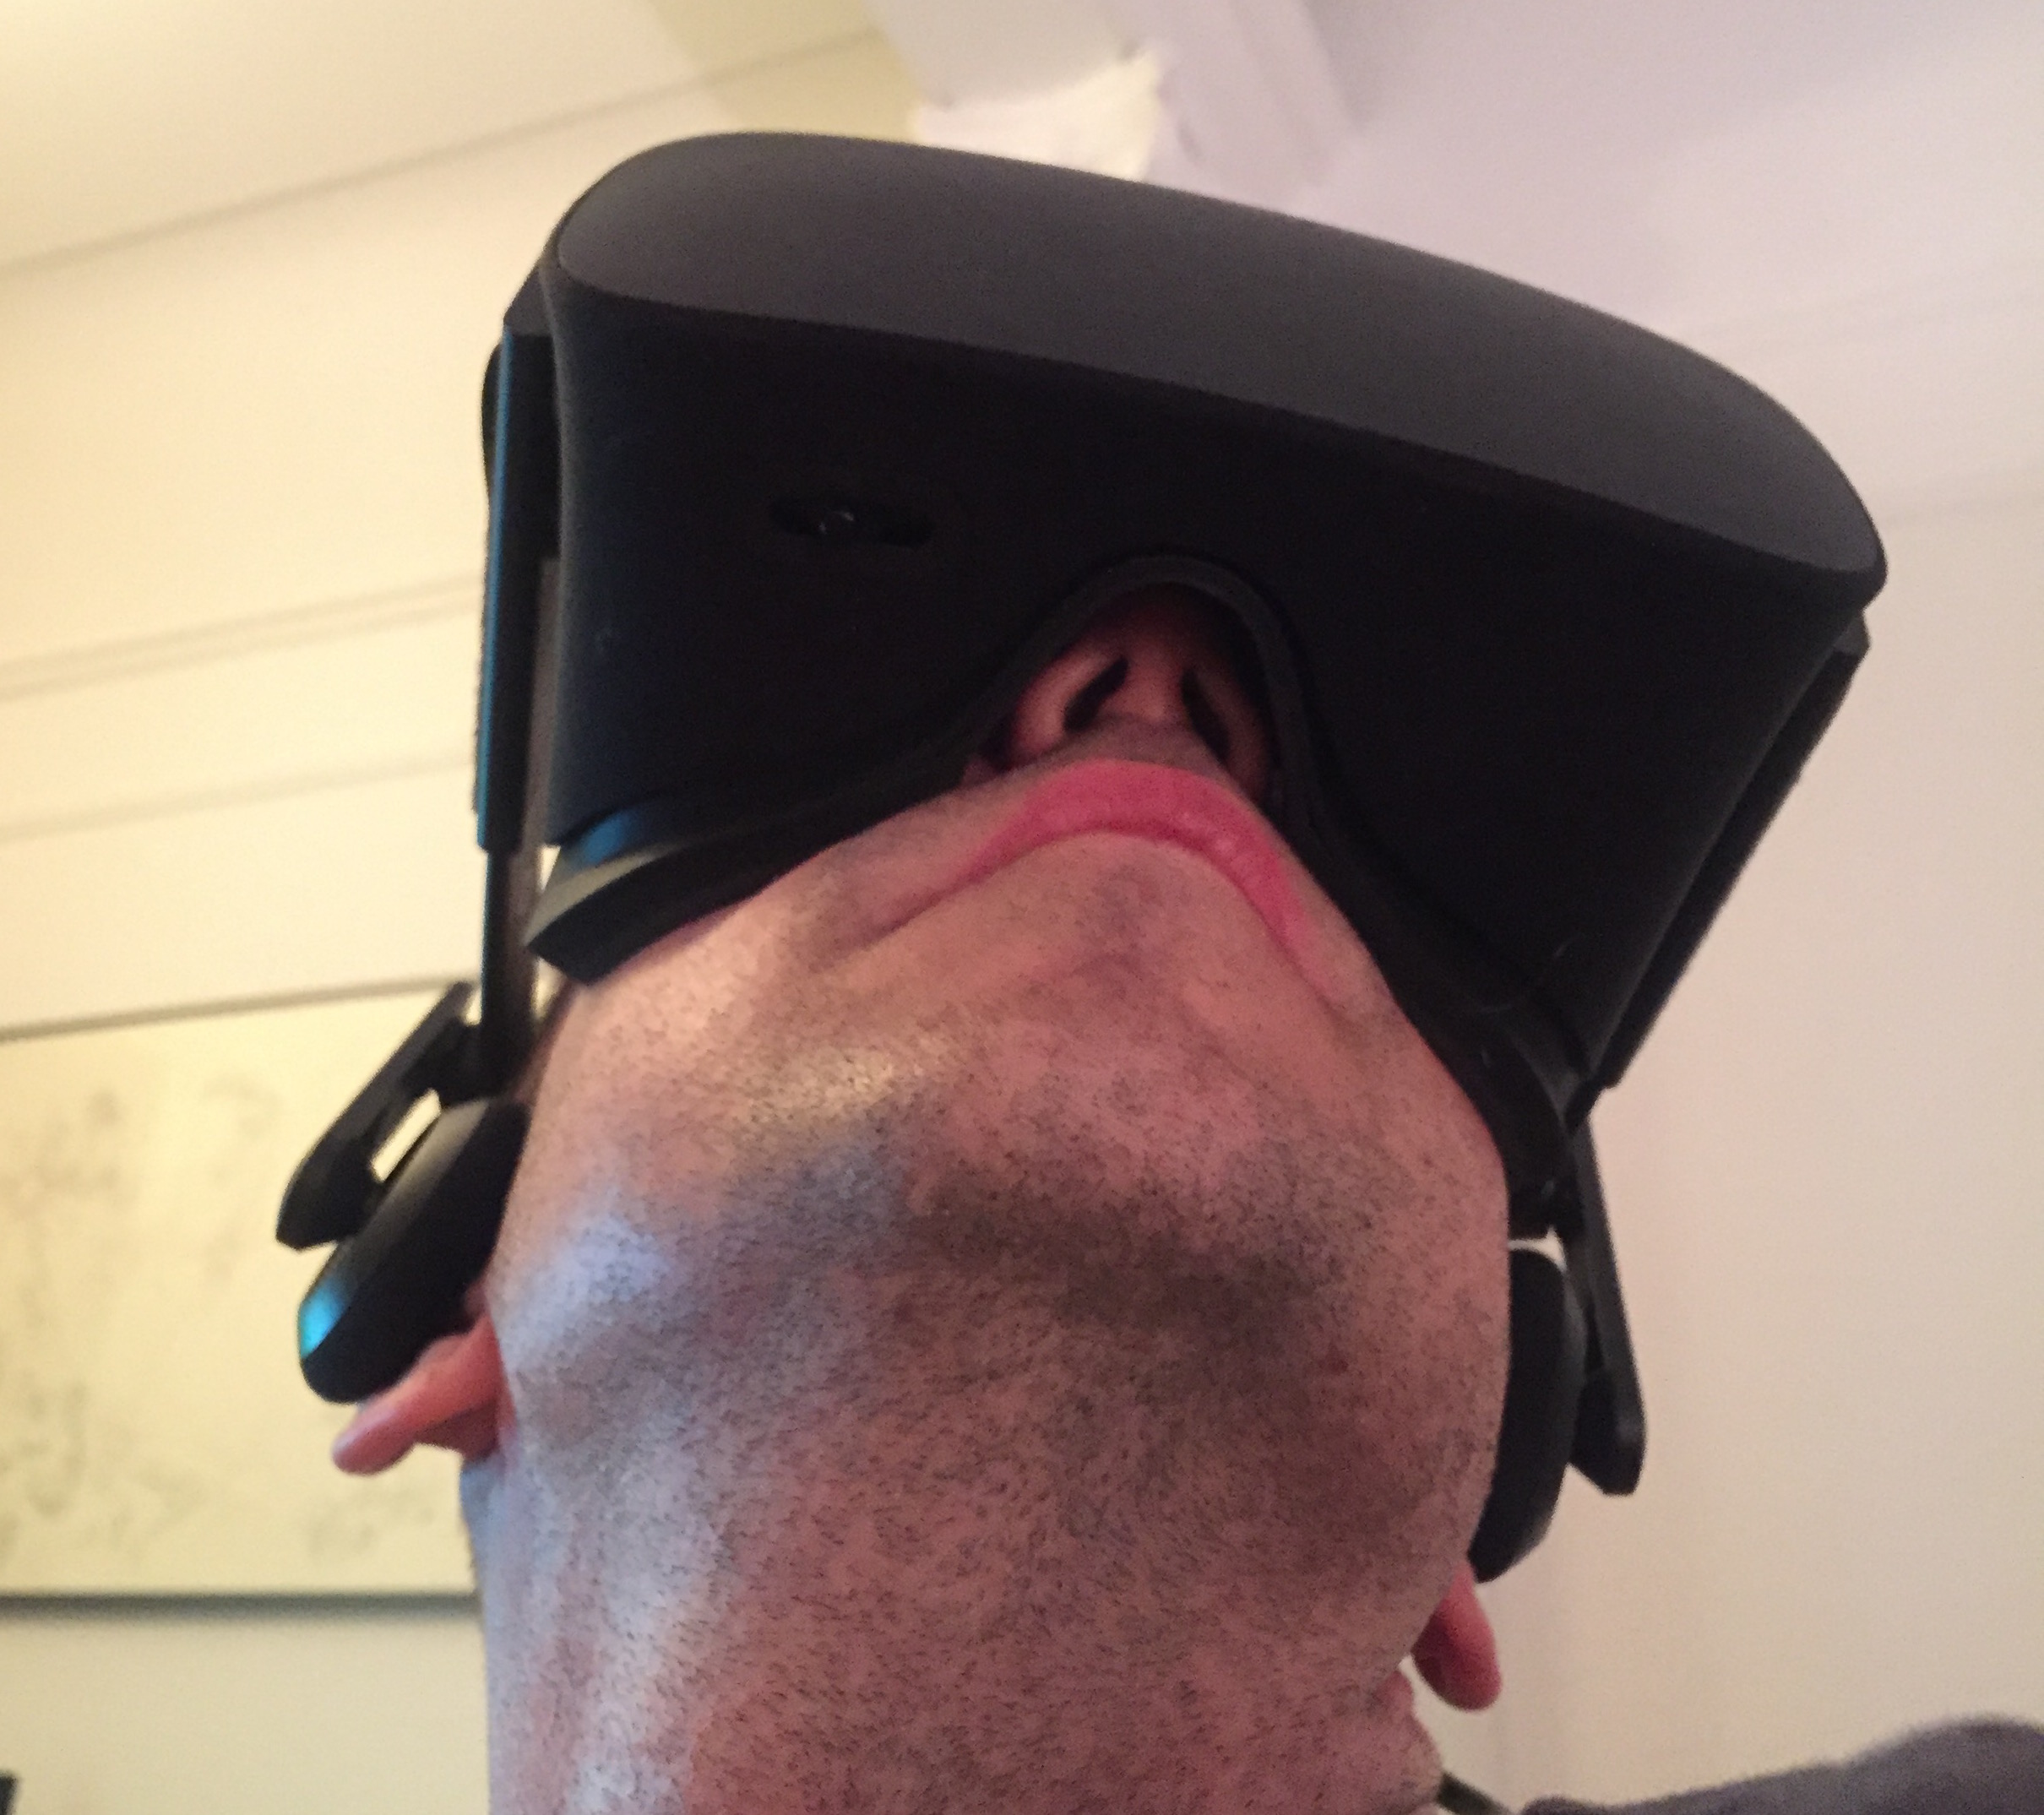 The Highs And Lows Of VR Gaming, Five Months In